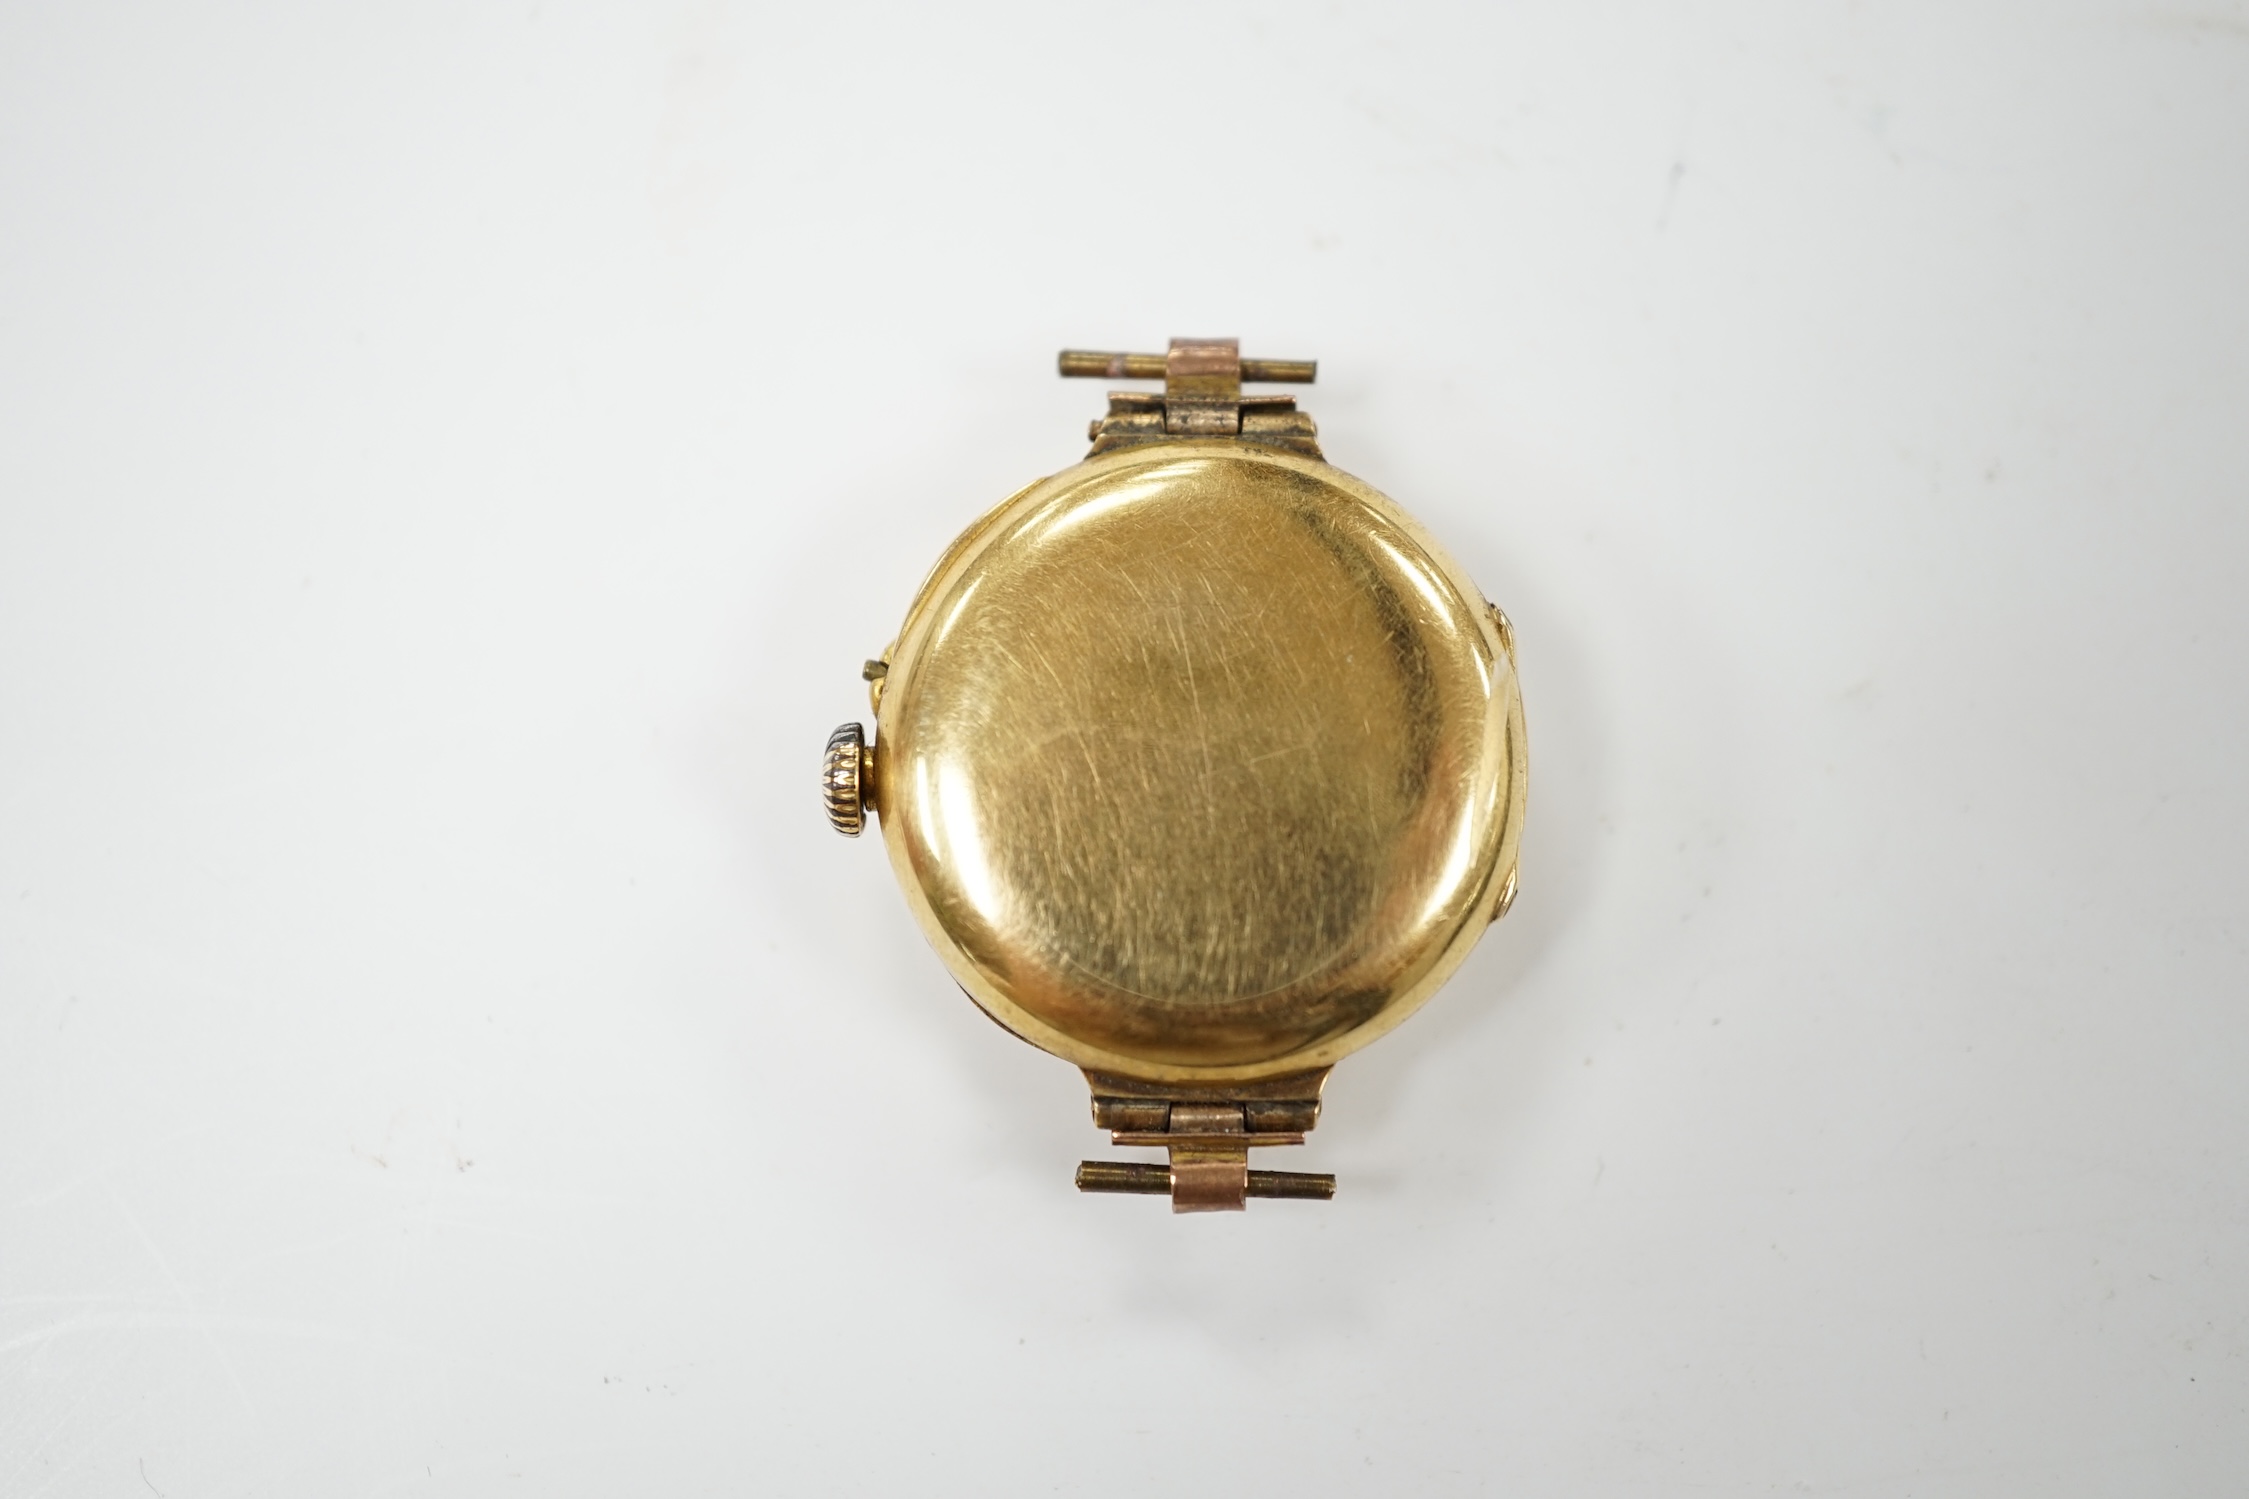 A lady's 18k manual wind wrist watch, with Arabic dial, no strap, gross weight 17.1 grams, Condition - poor